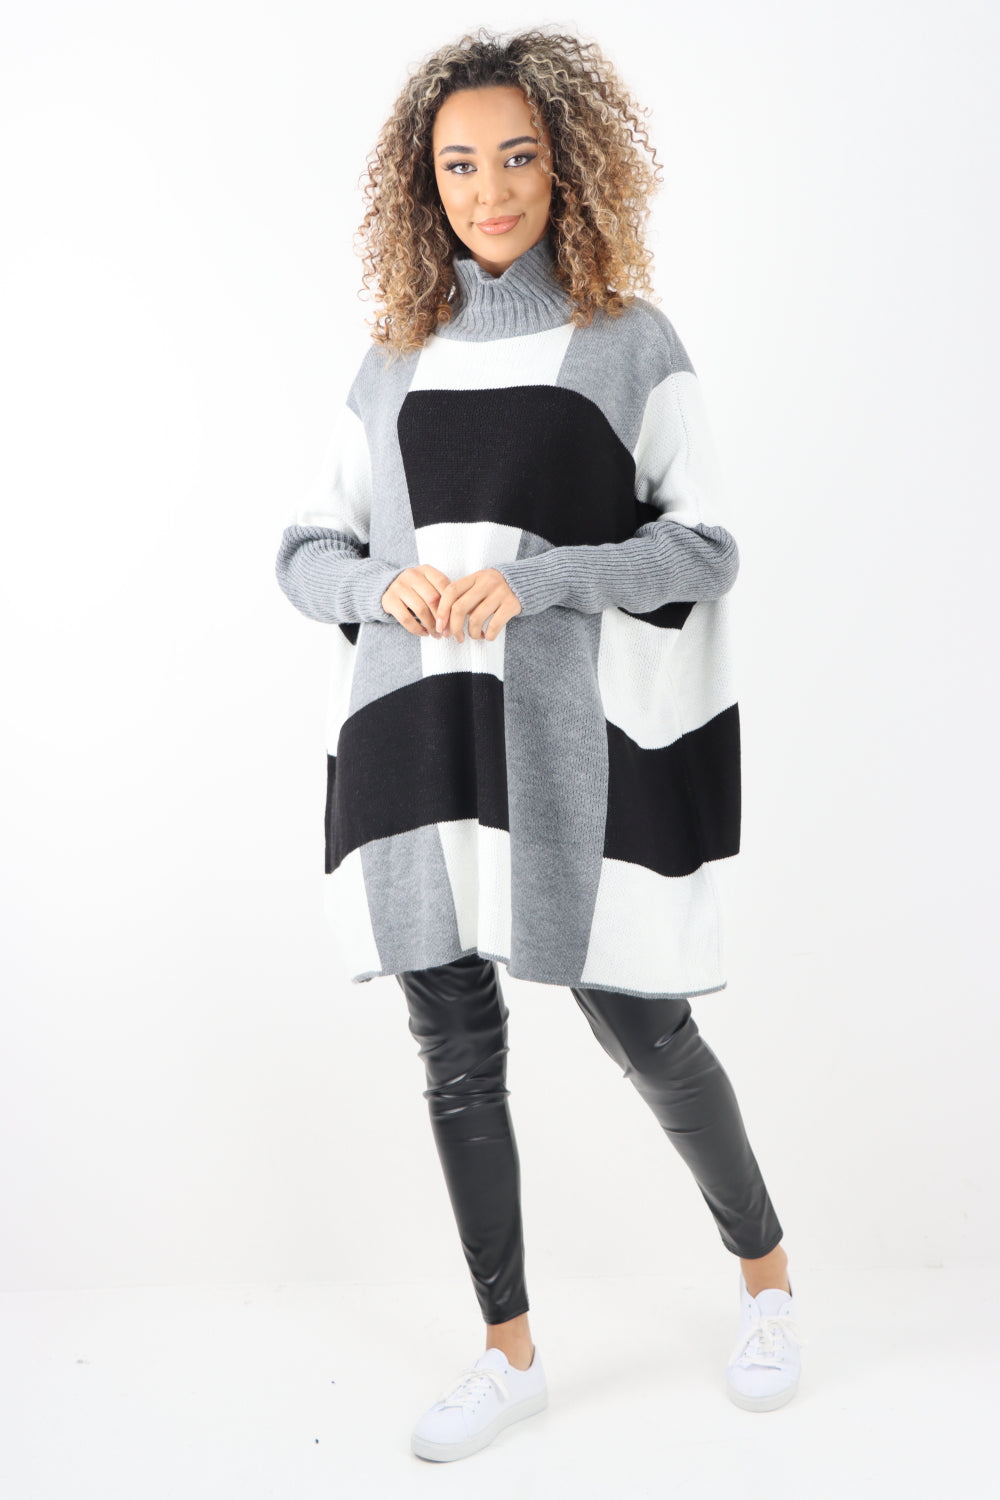 Italian Checked Print Ribbed Cowl Neck Long Sleeve Knitted Jumper Top